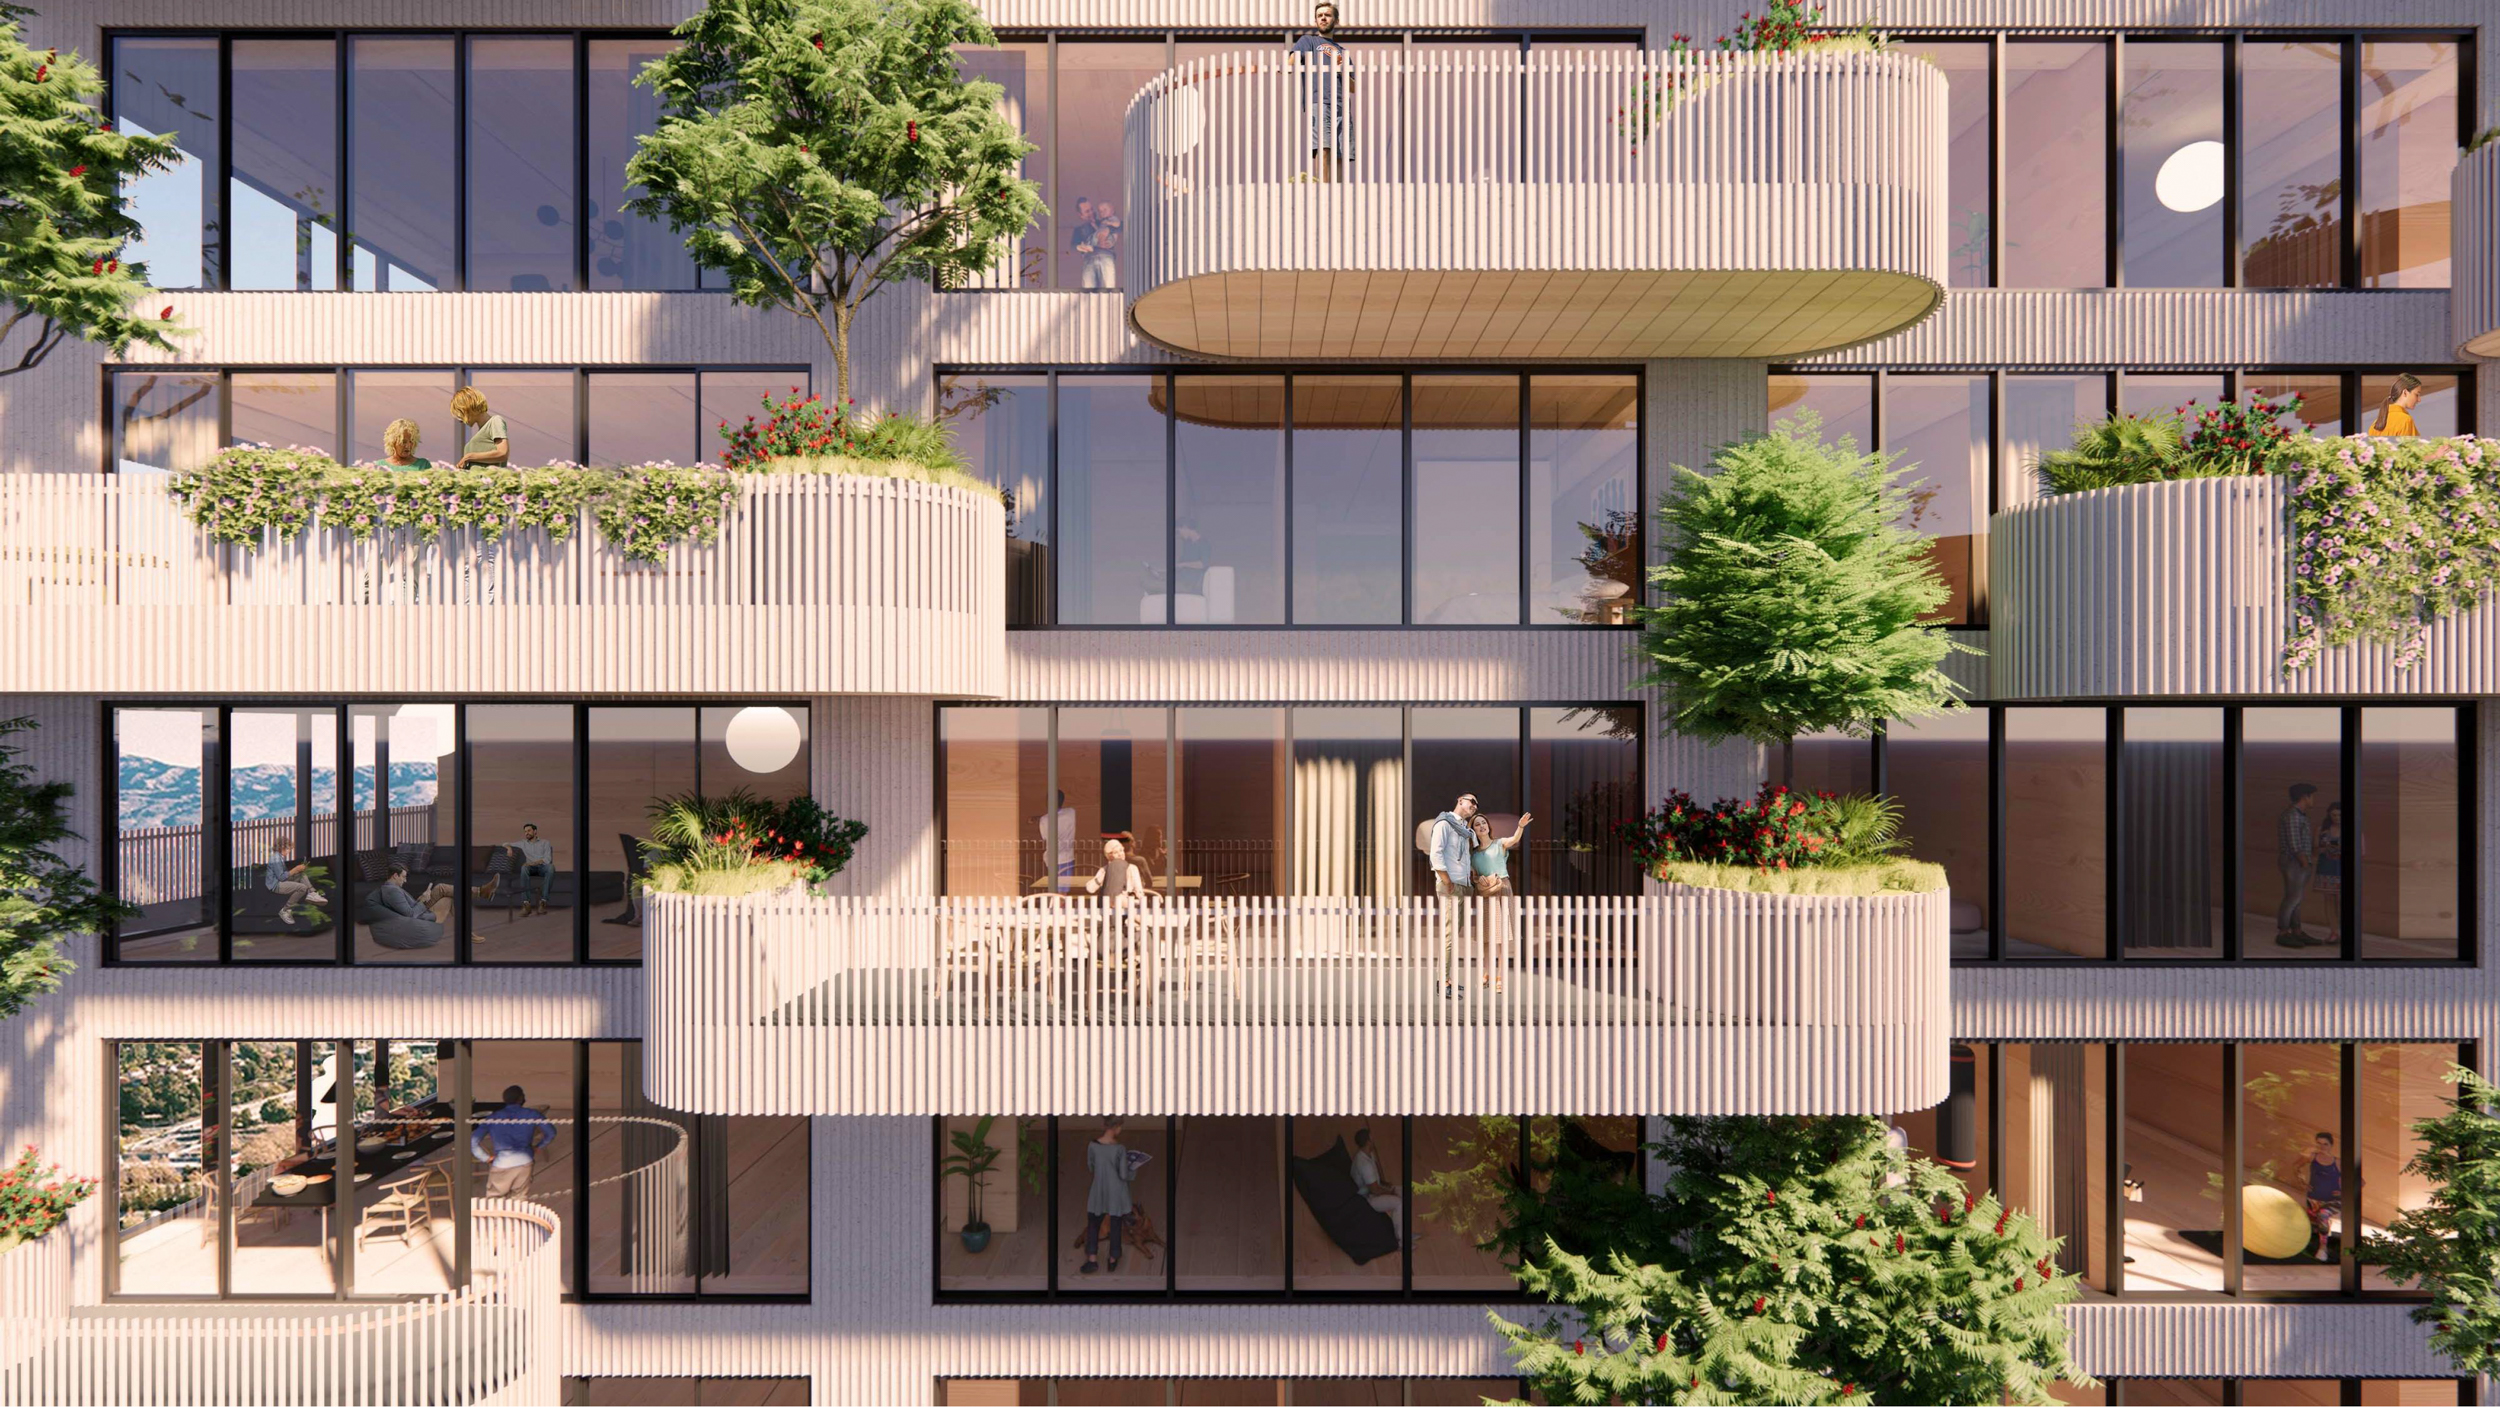 Nabr Tower A facade balconies, rendering by RMW Architecture